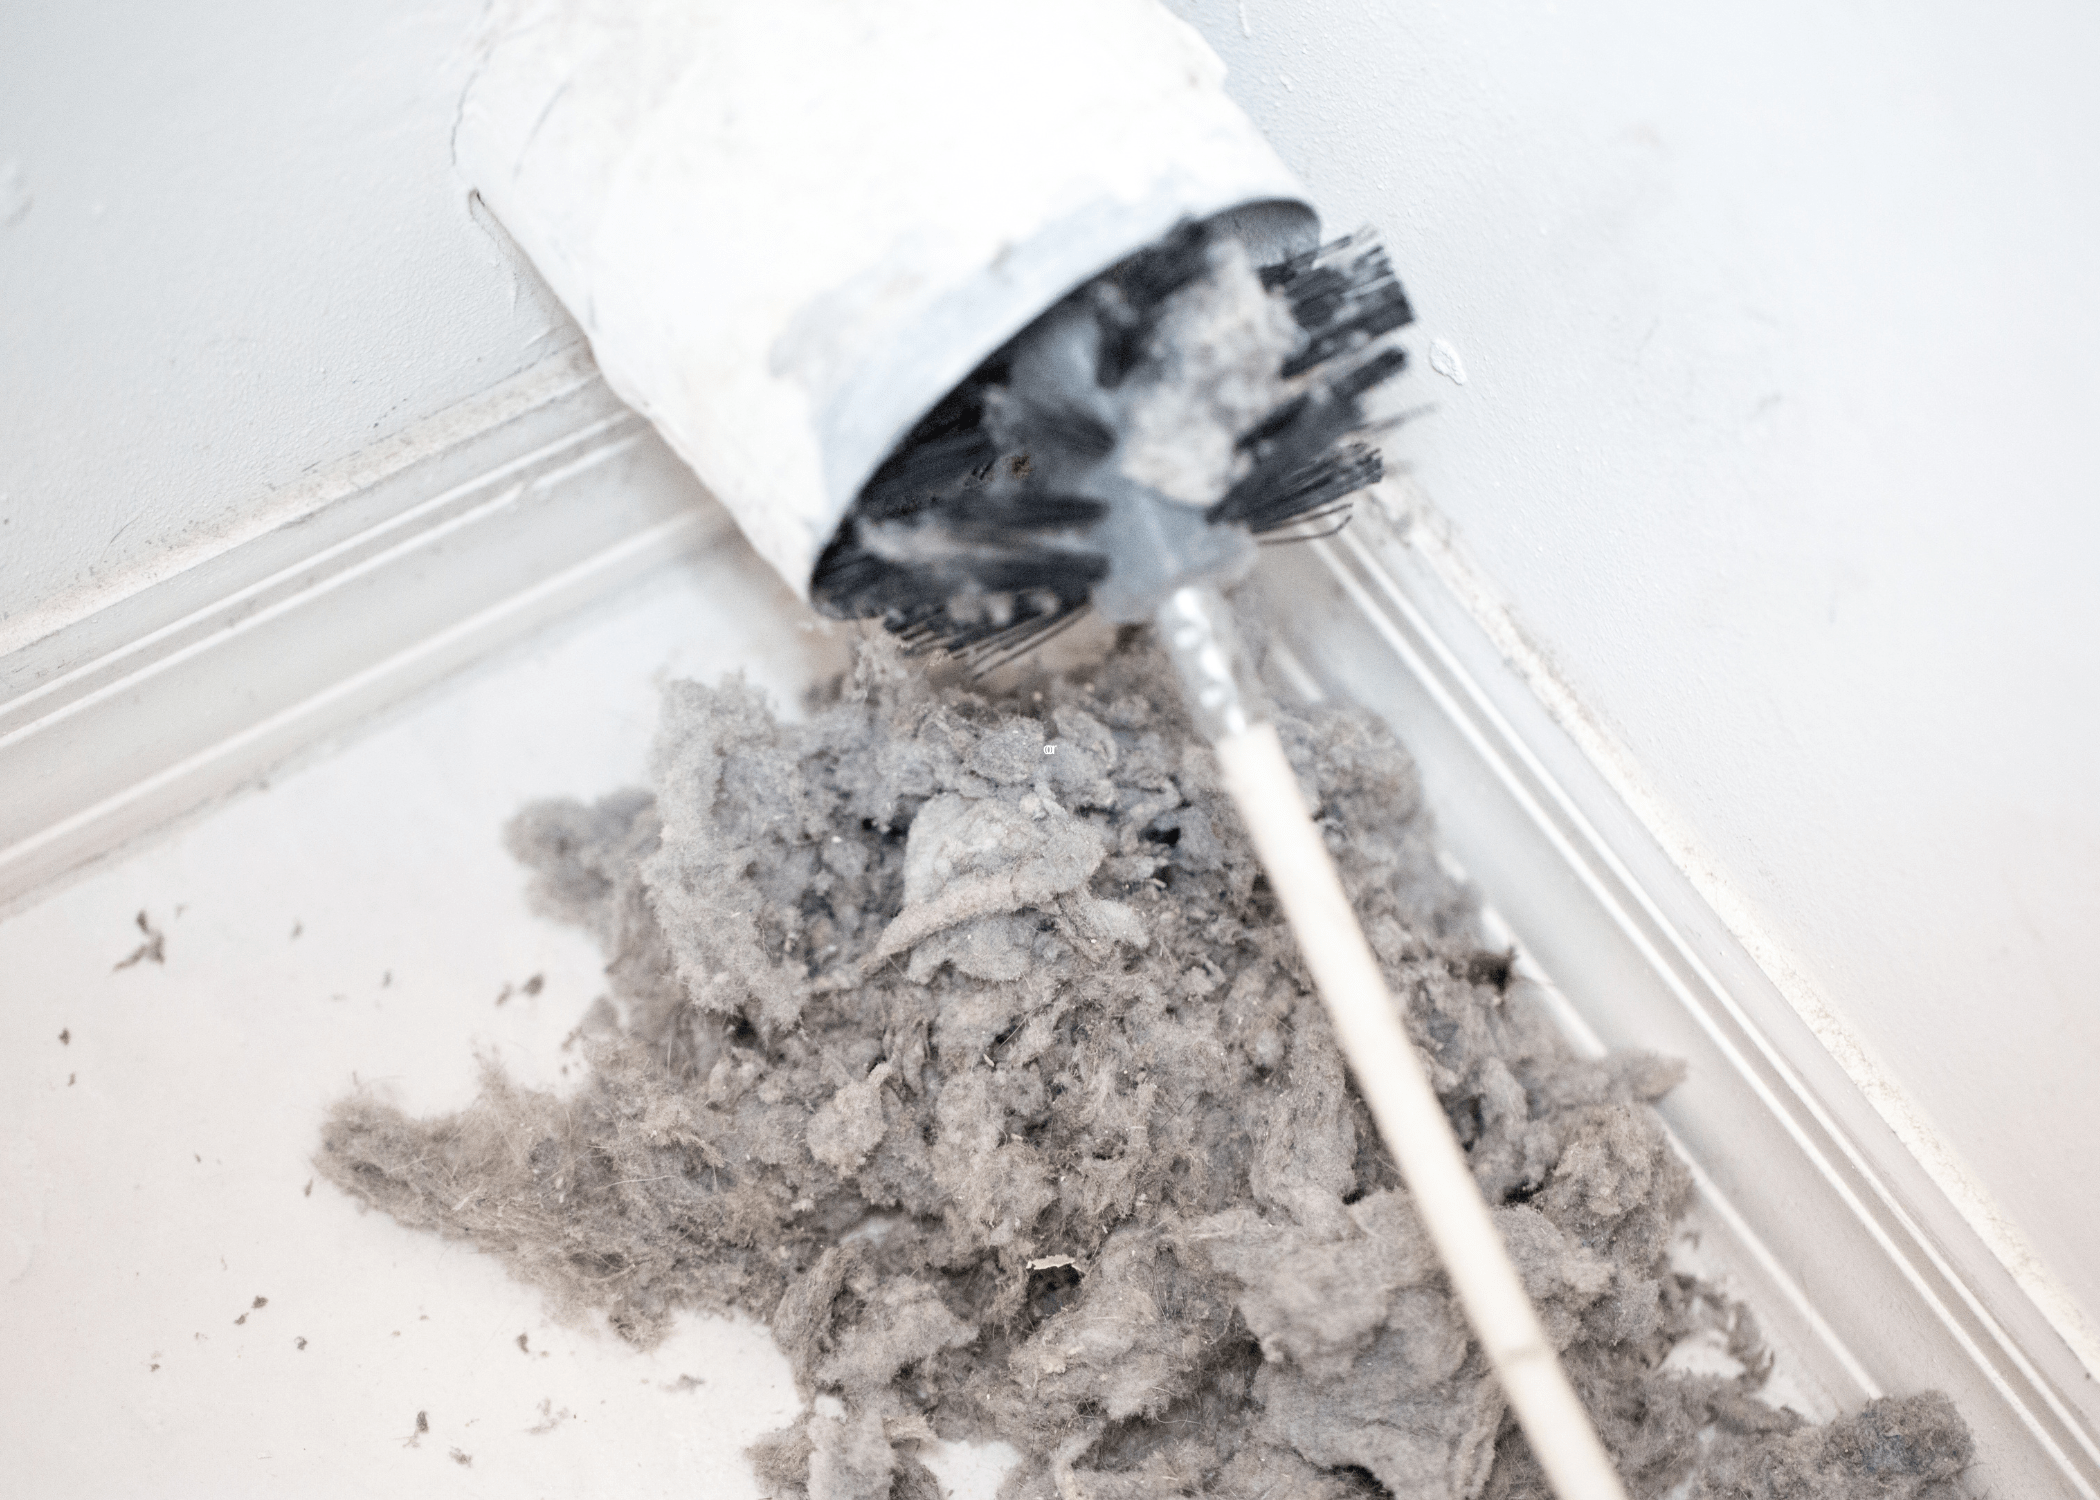 How to Clean Lint Out of Dryer: A Crucial Home Maintenance Task